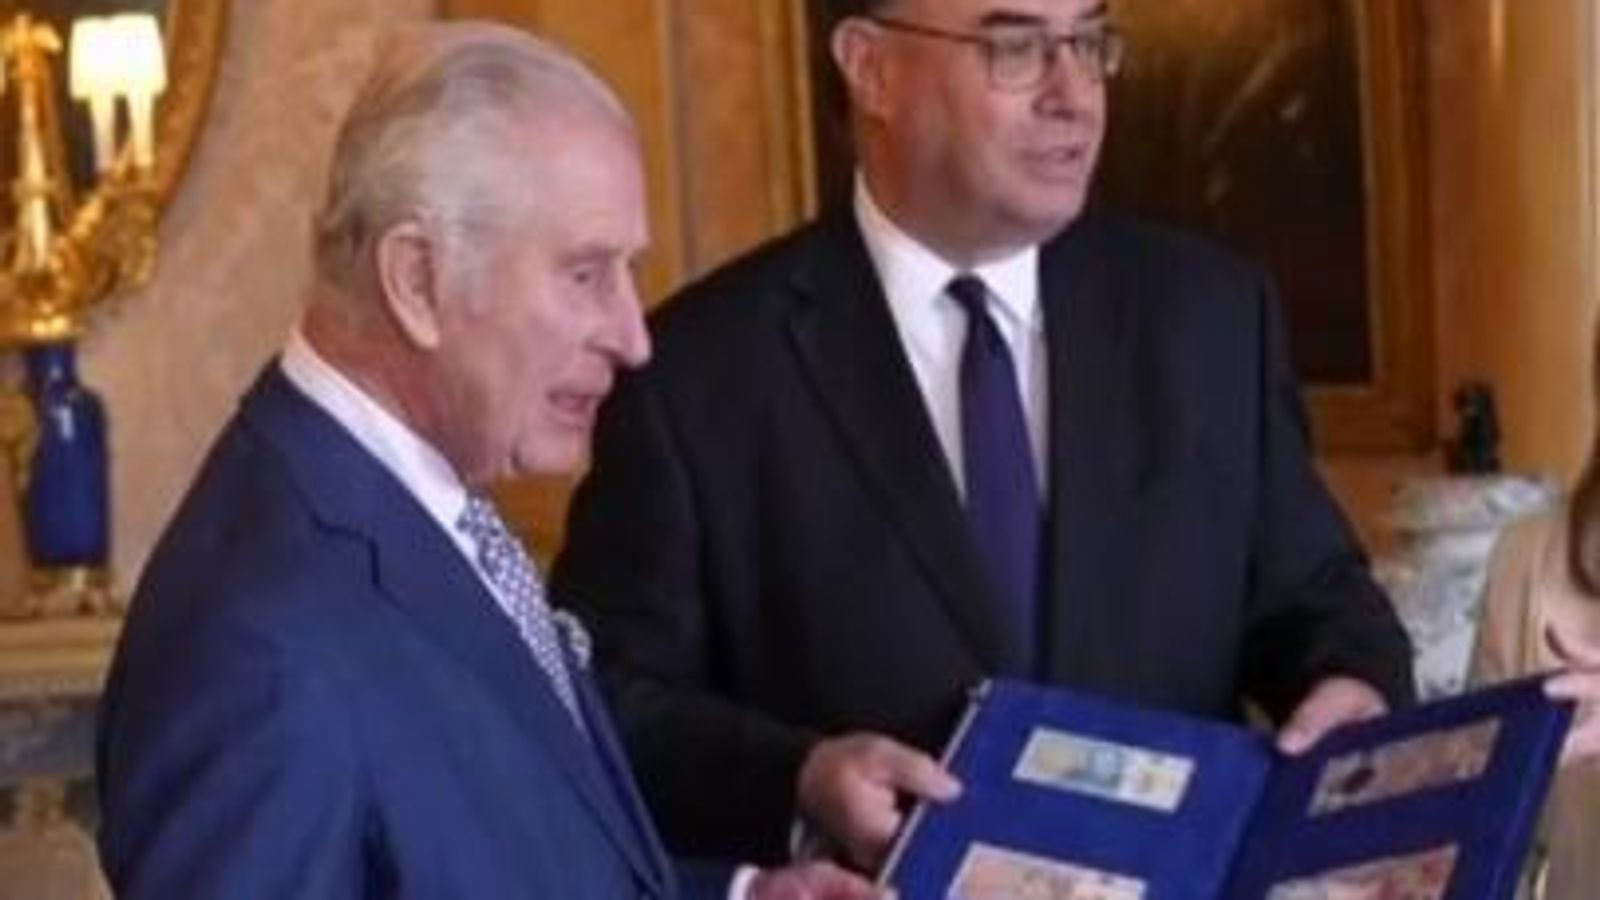 King presented with new banknotes